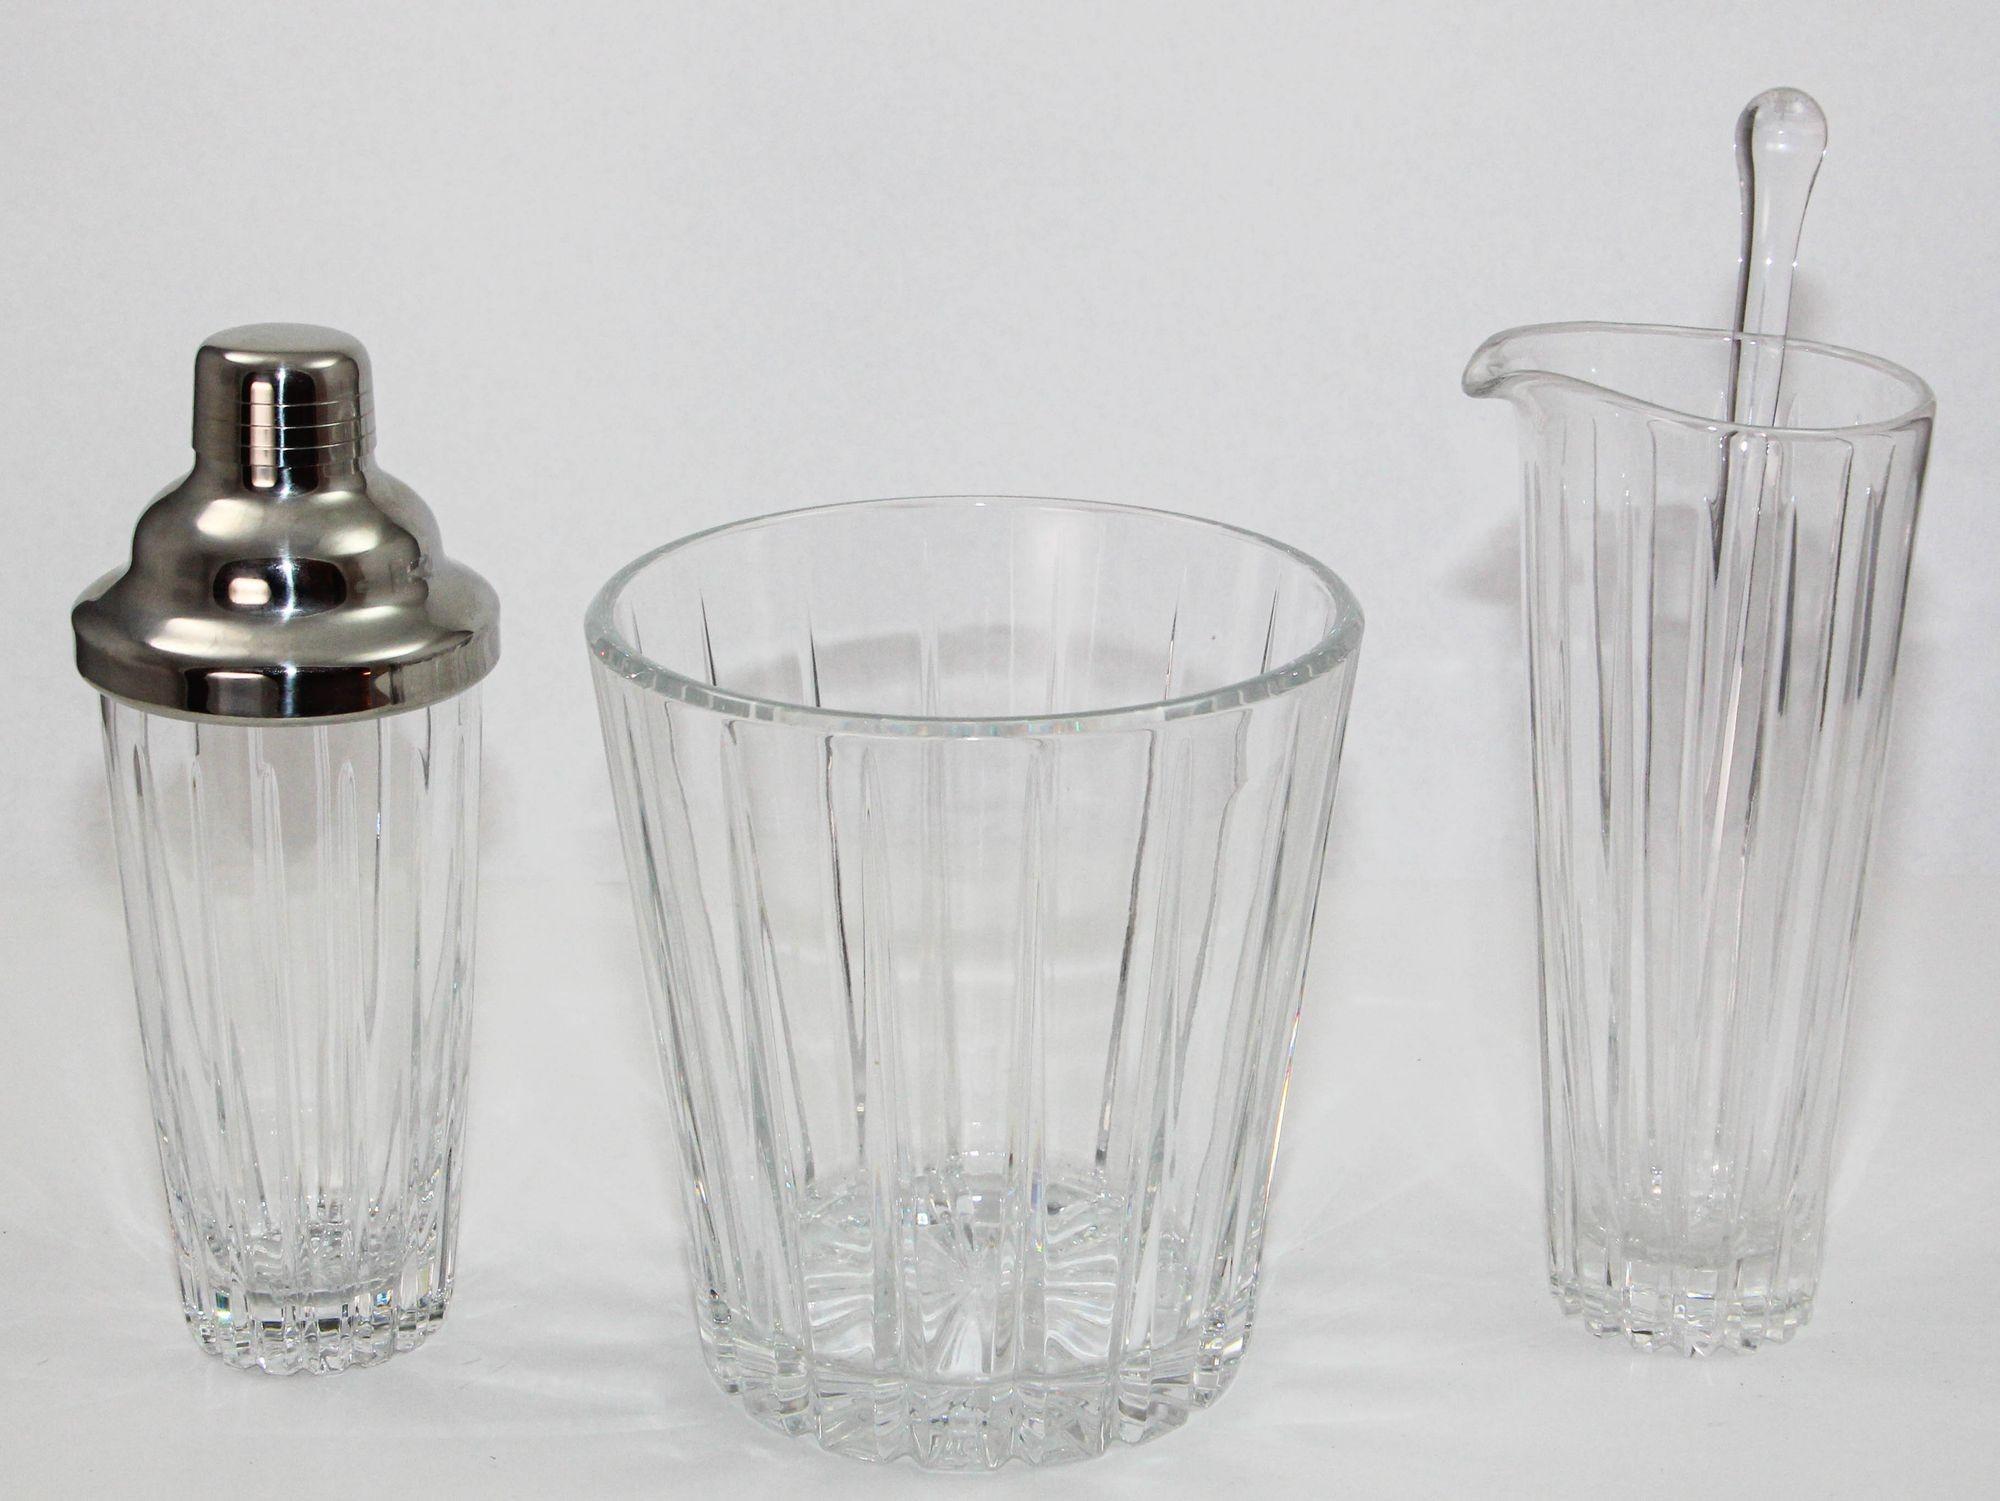 This Art Deco-inspired crystal cocktail set exudes elegance and contemporary flair with its vertical cut lines that impart a dazzling finish. Meticulously hand-cut and polished, the set includes a crystal cocktail shaker, ice bucket, and